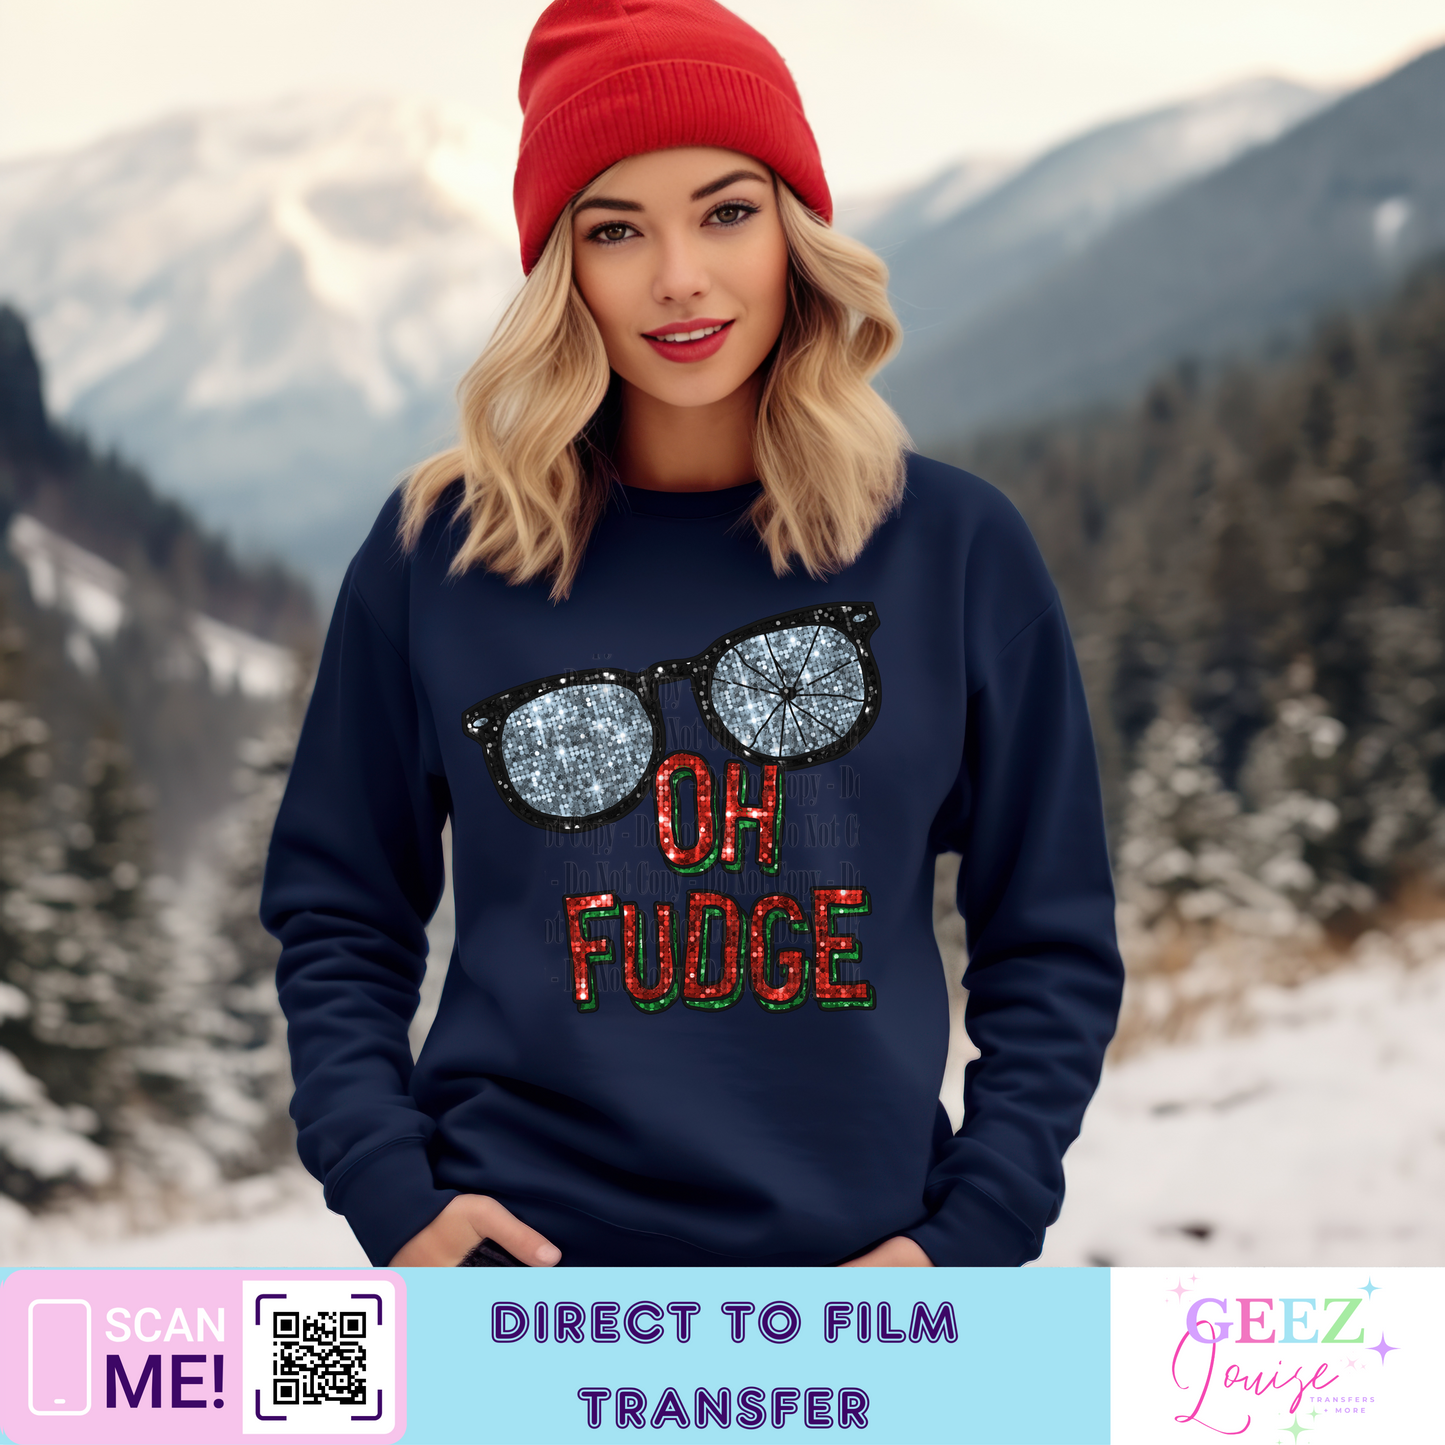 Oh fudge Christmas - Direct to Film Transfer - made to order